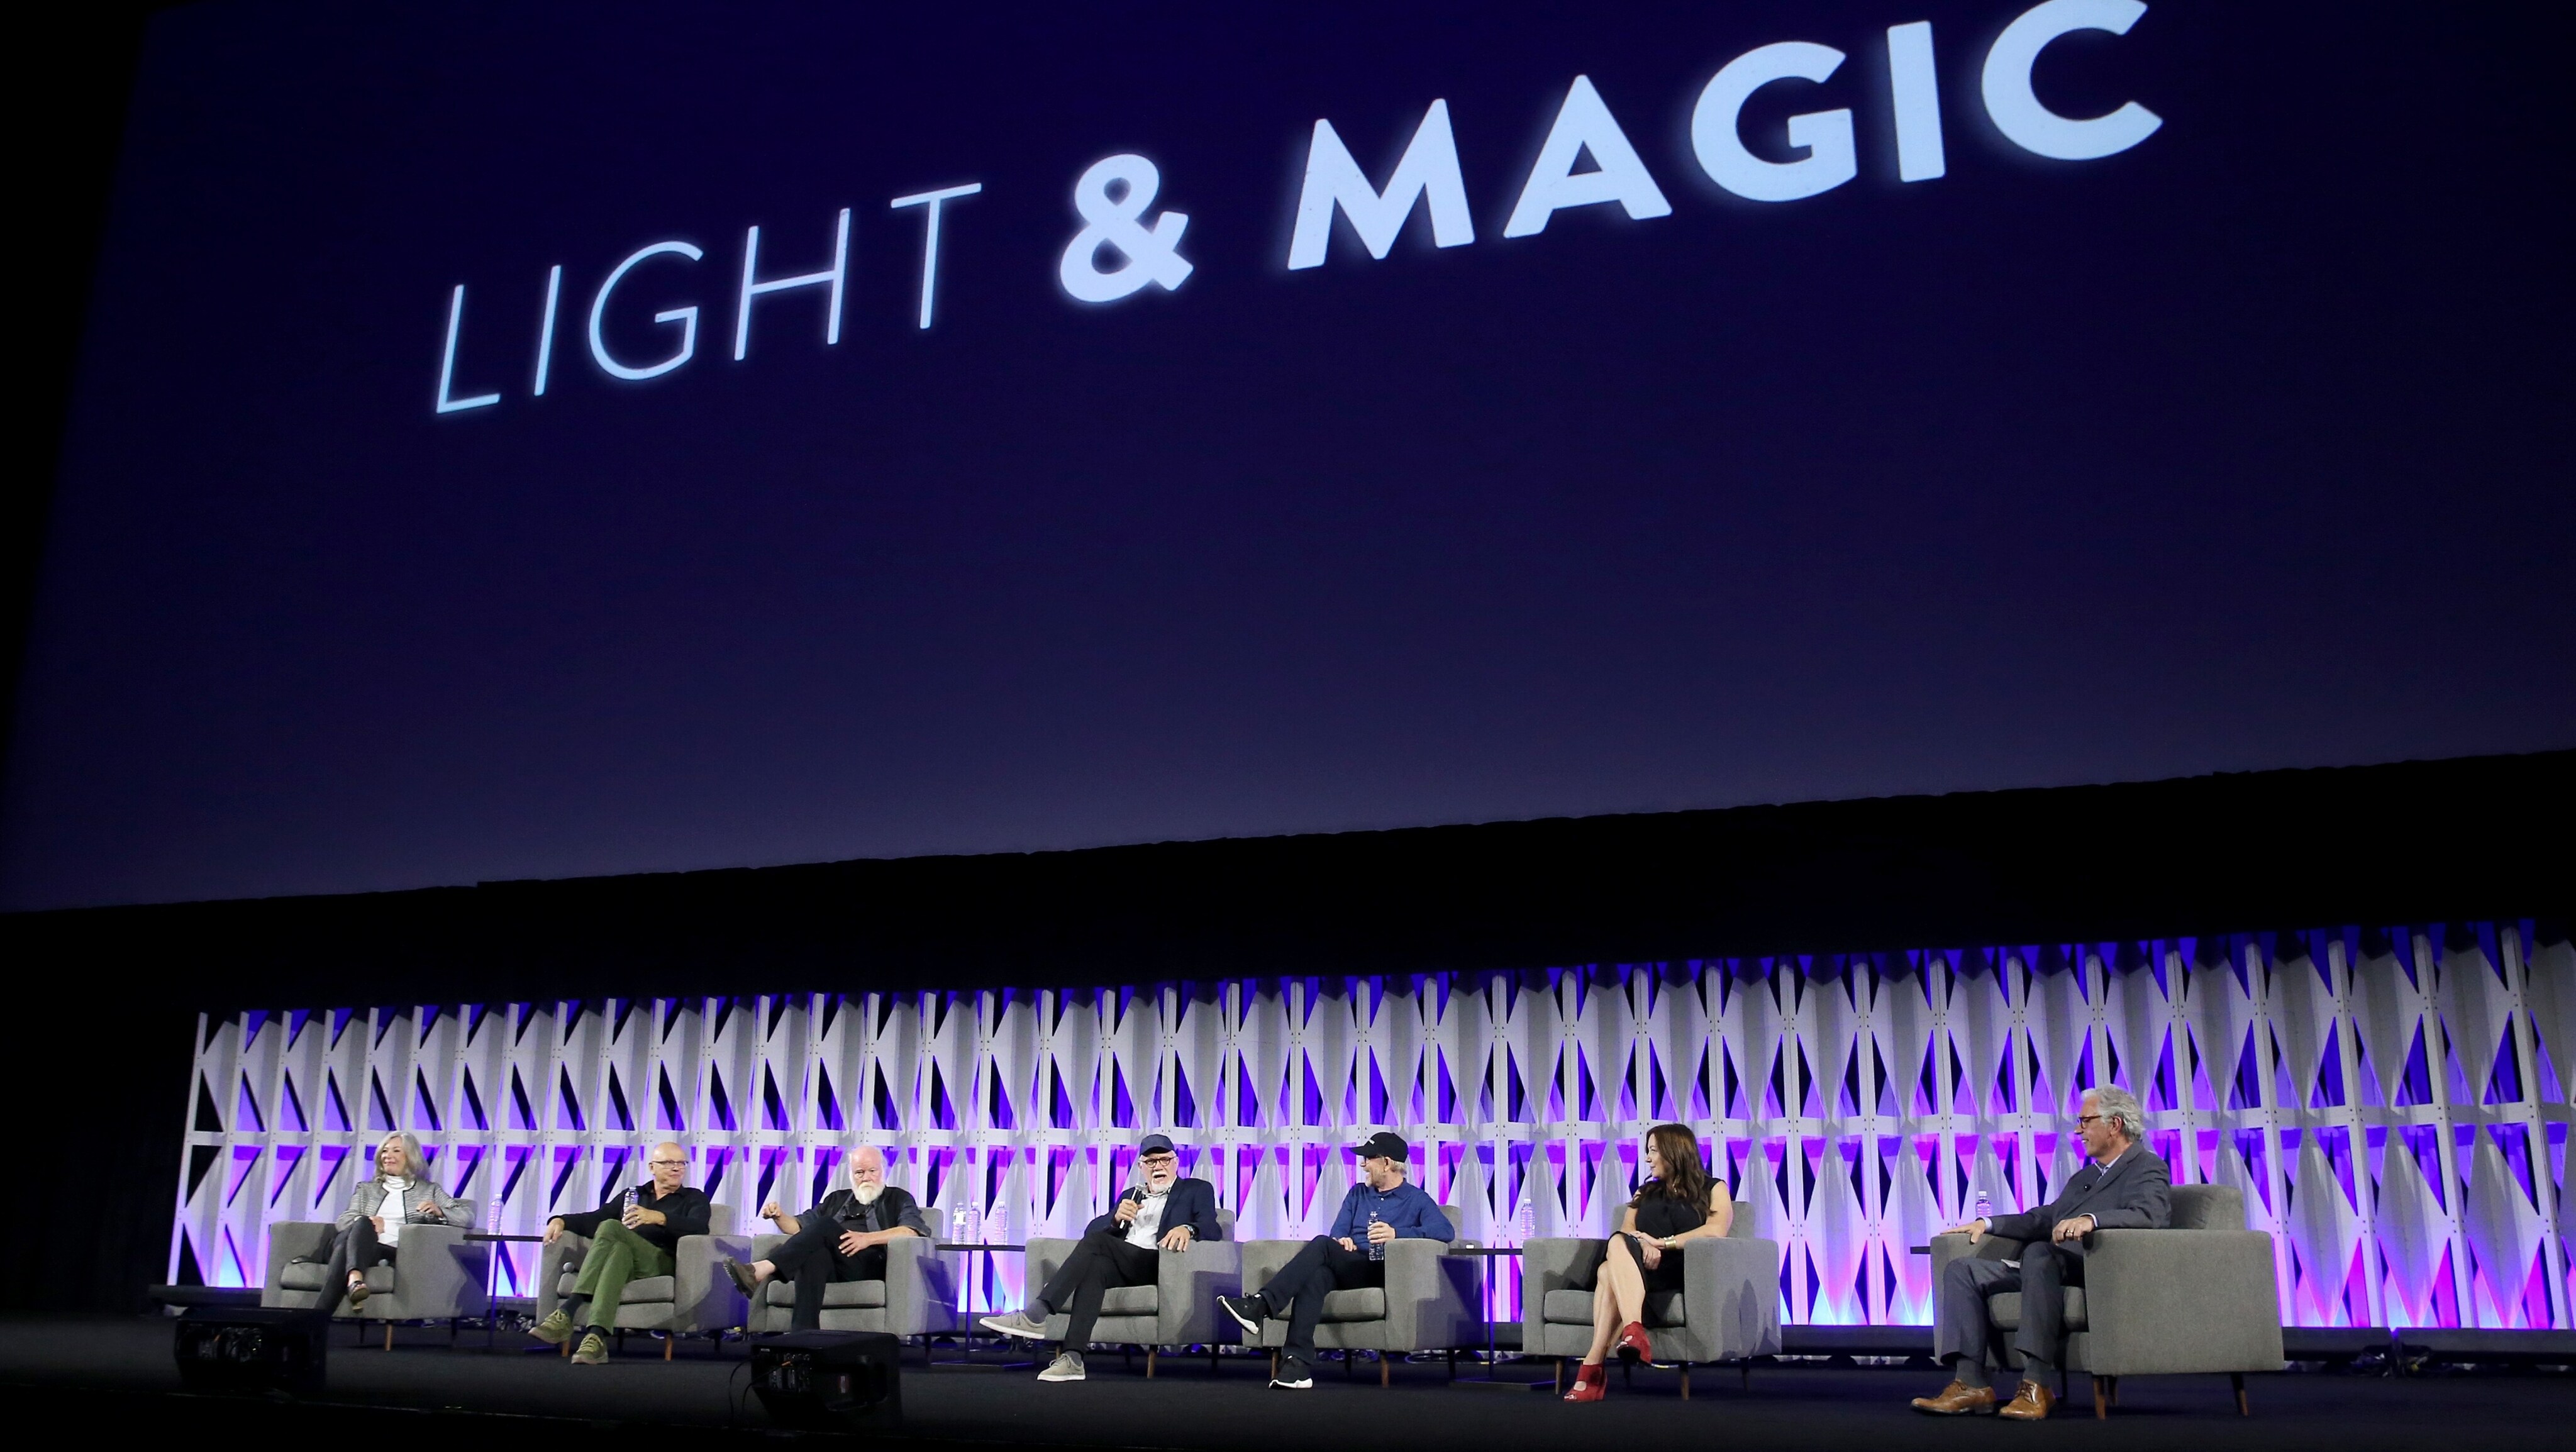 DISNEY+ RELEASES PHOTOS FROM “LIGHT & MAGIC” STAR WARS CELEBRATION PANEL